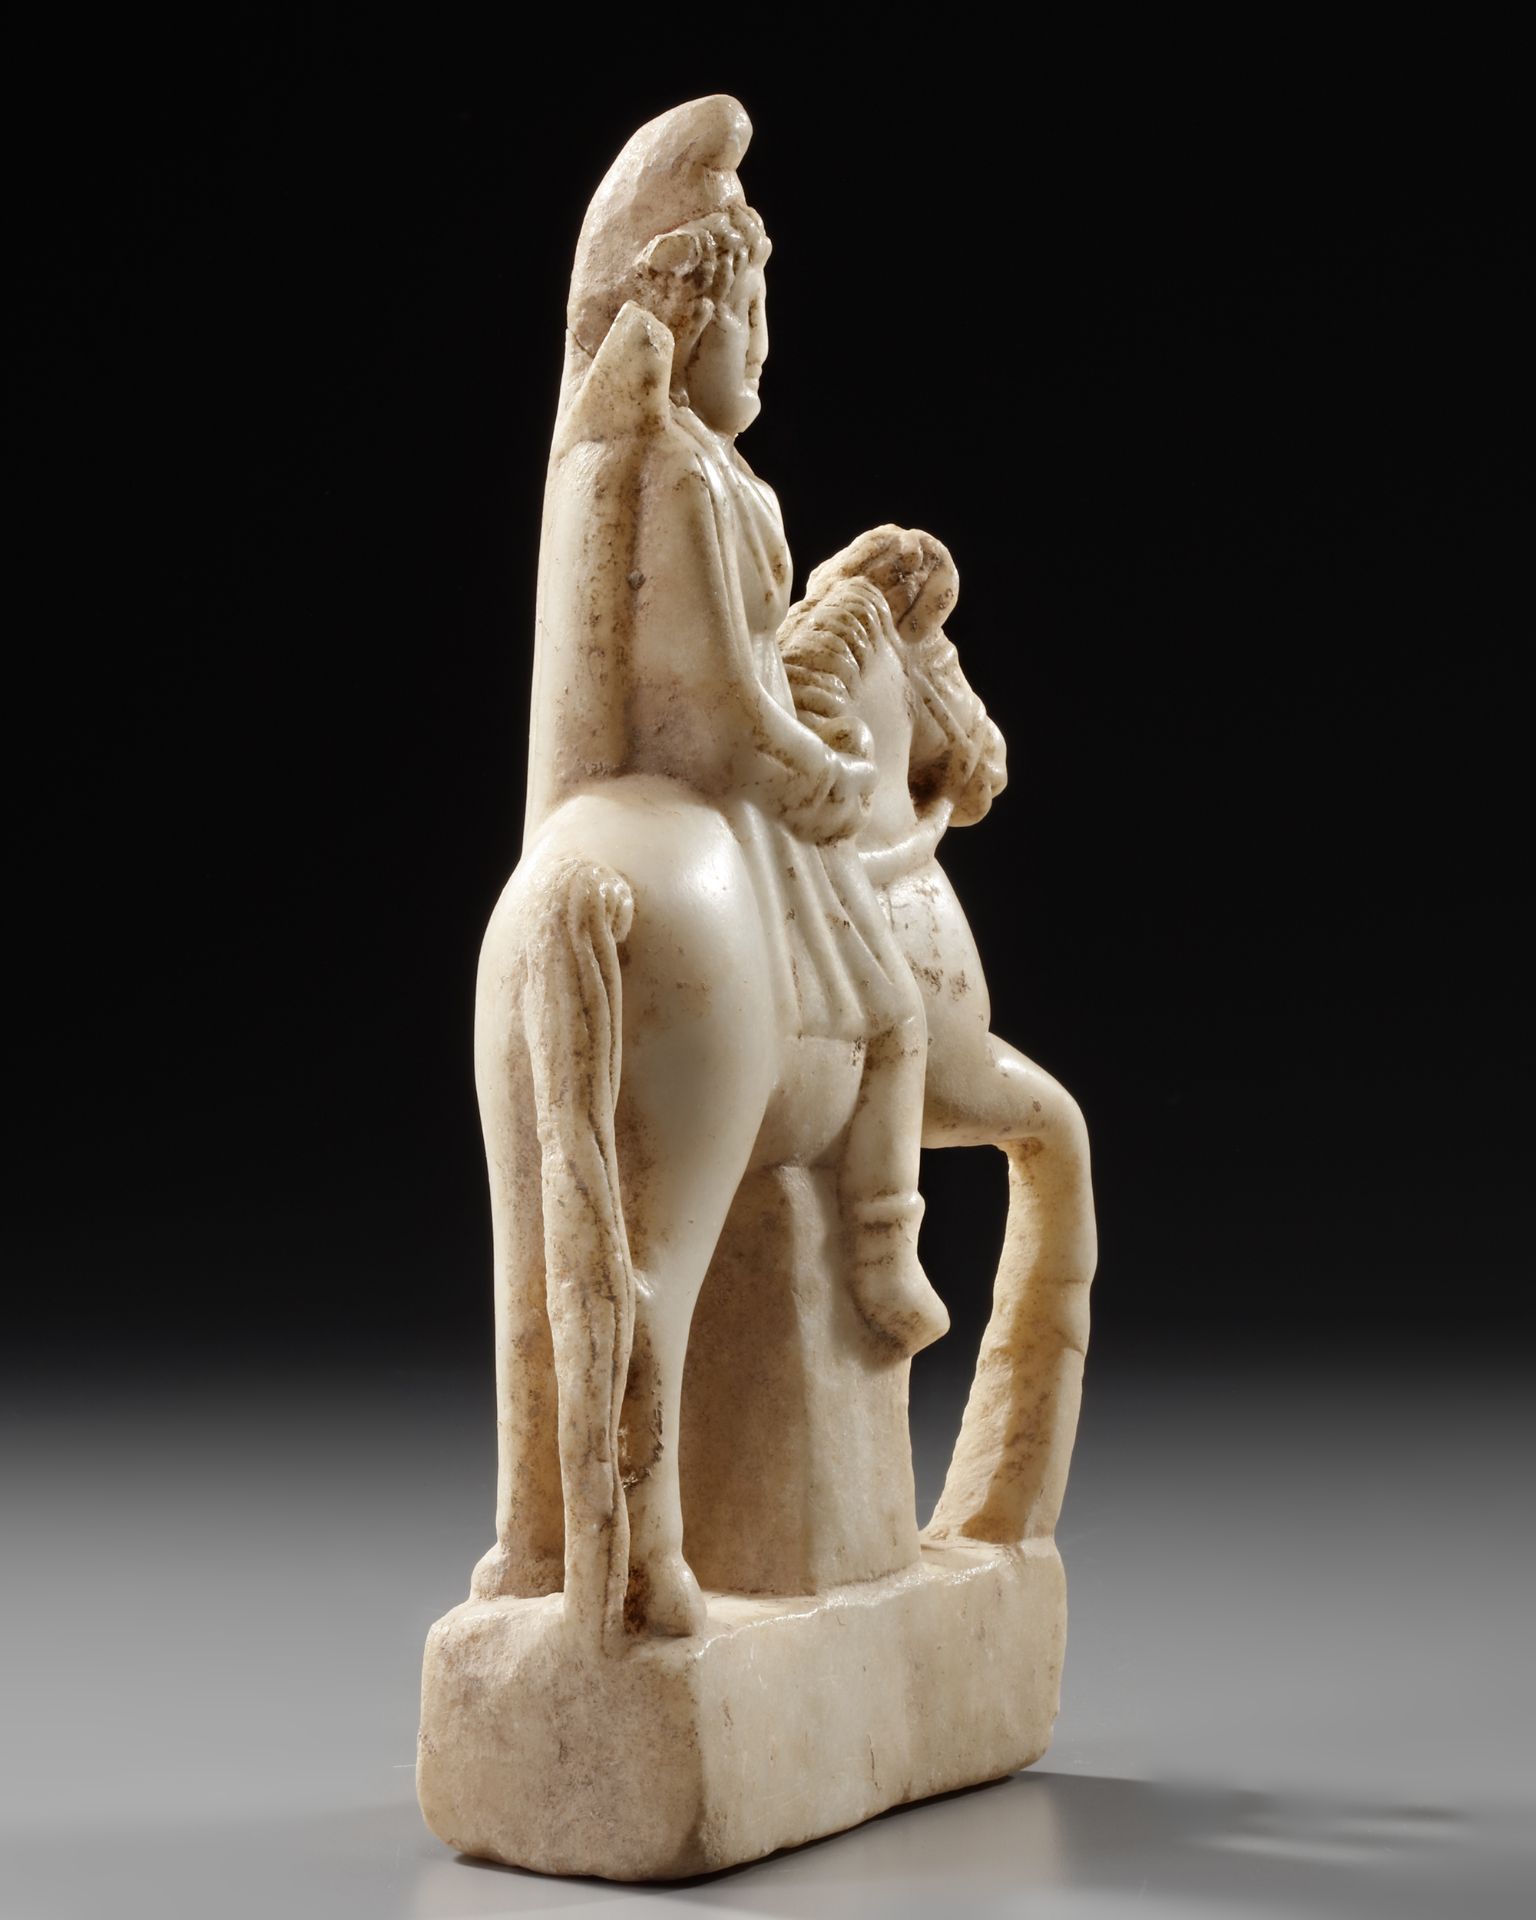 A ROMAN IMPERIAL STATUETTE OF THE GOD MAN ON HORSEBACK, CIRCA 2ND-3RD CENTURY A.D. - Image 4 of 5